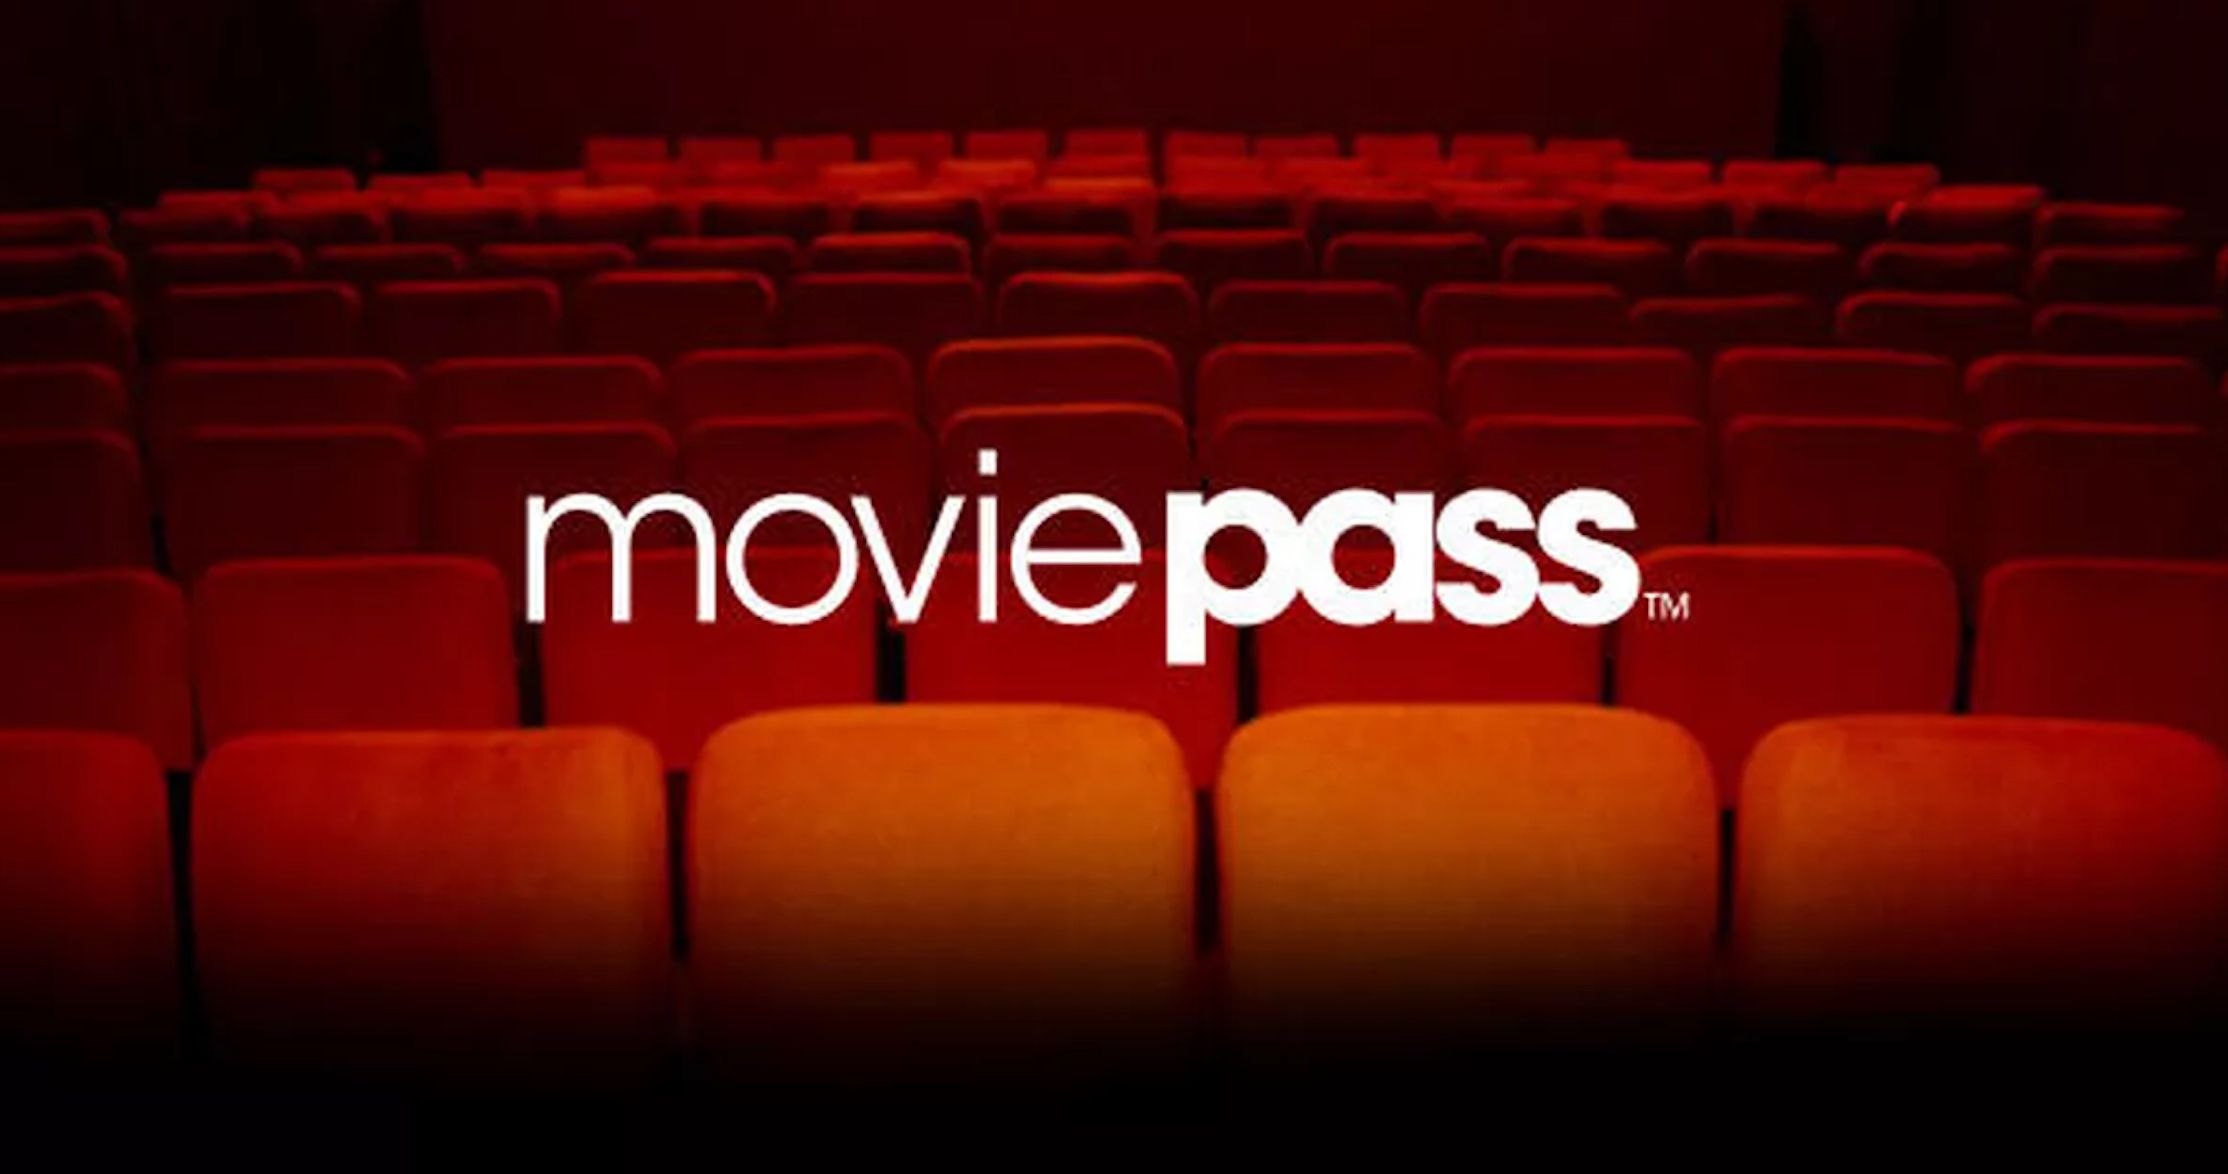 MoviePass Allegedly Tried to Stop Users from Watching Movies in Theaters